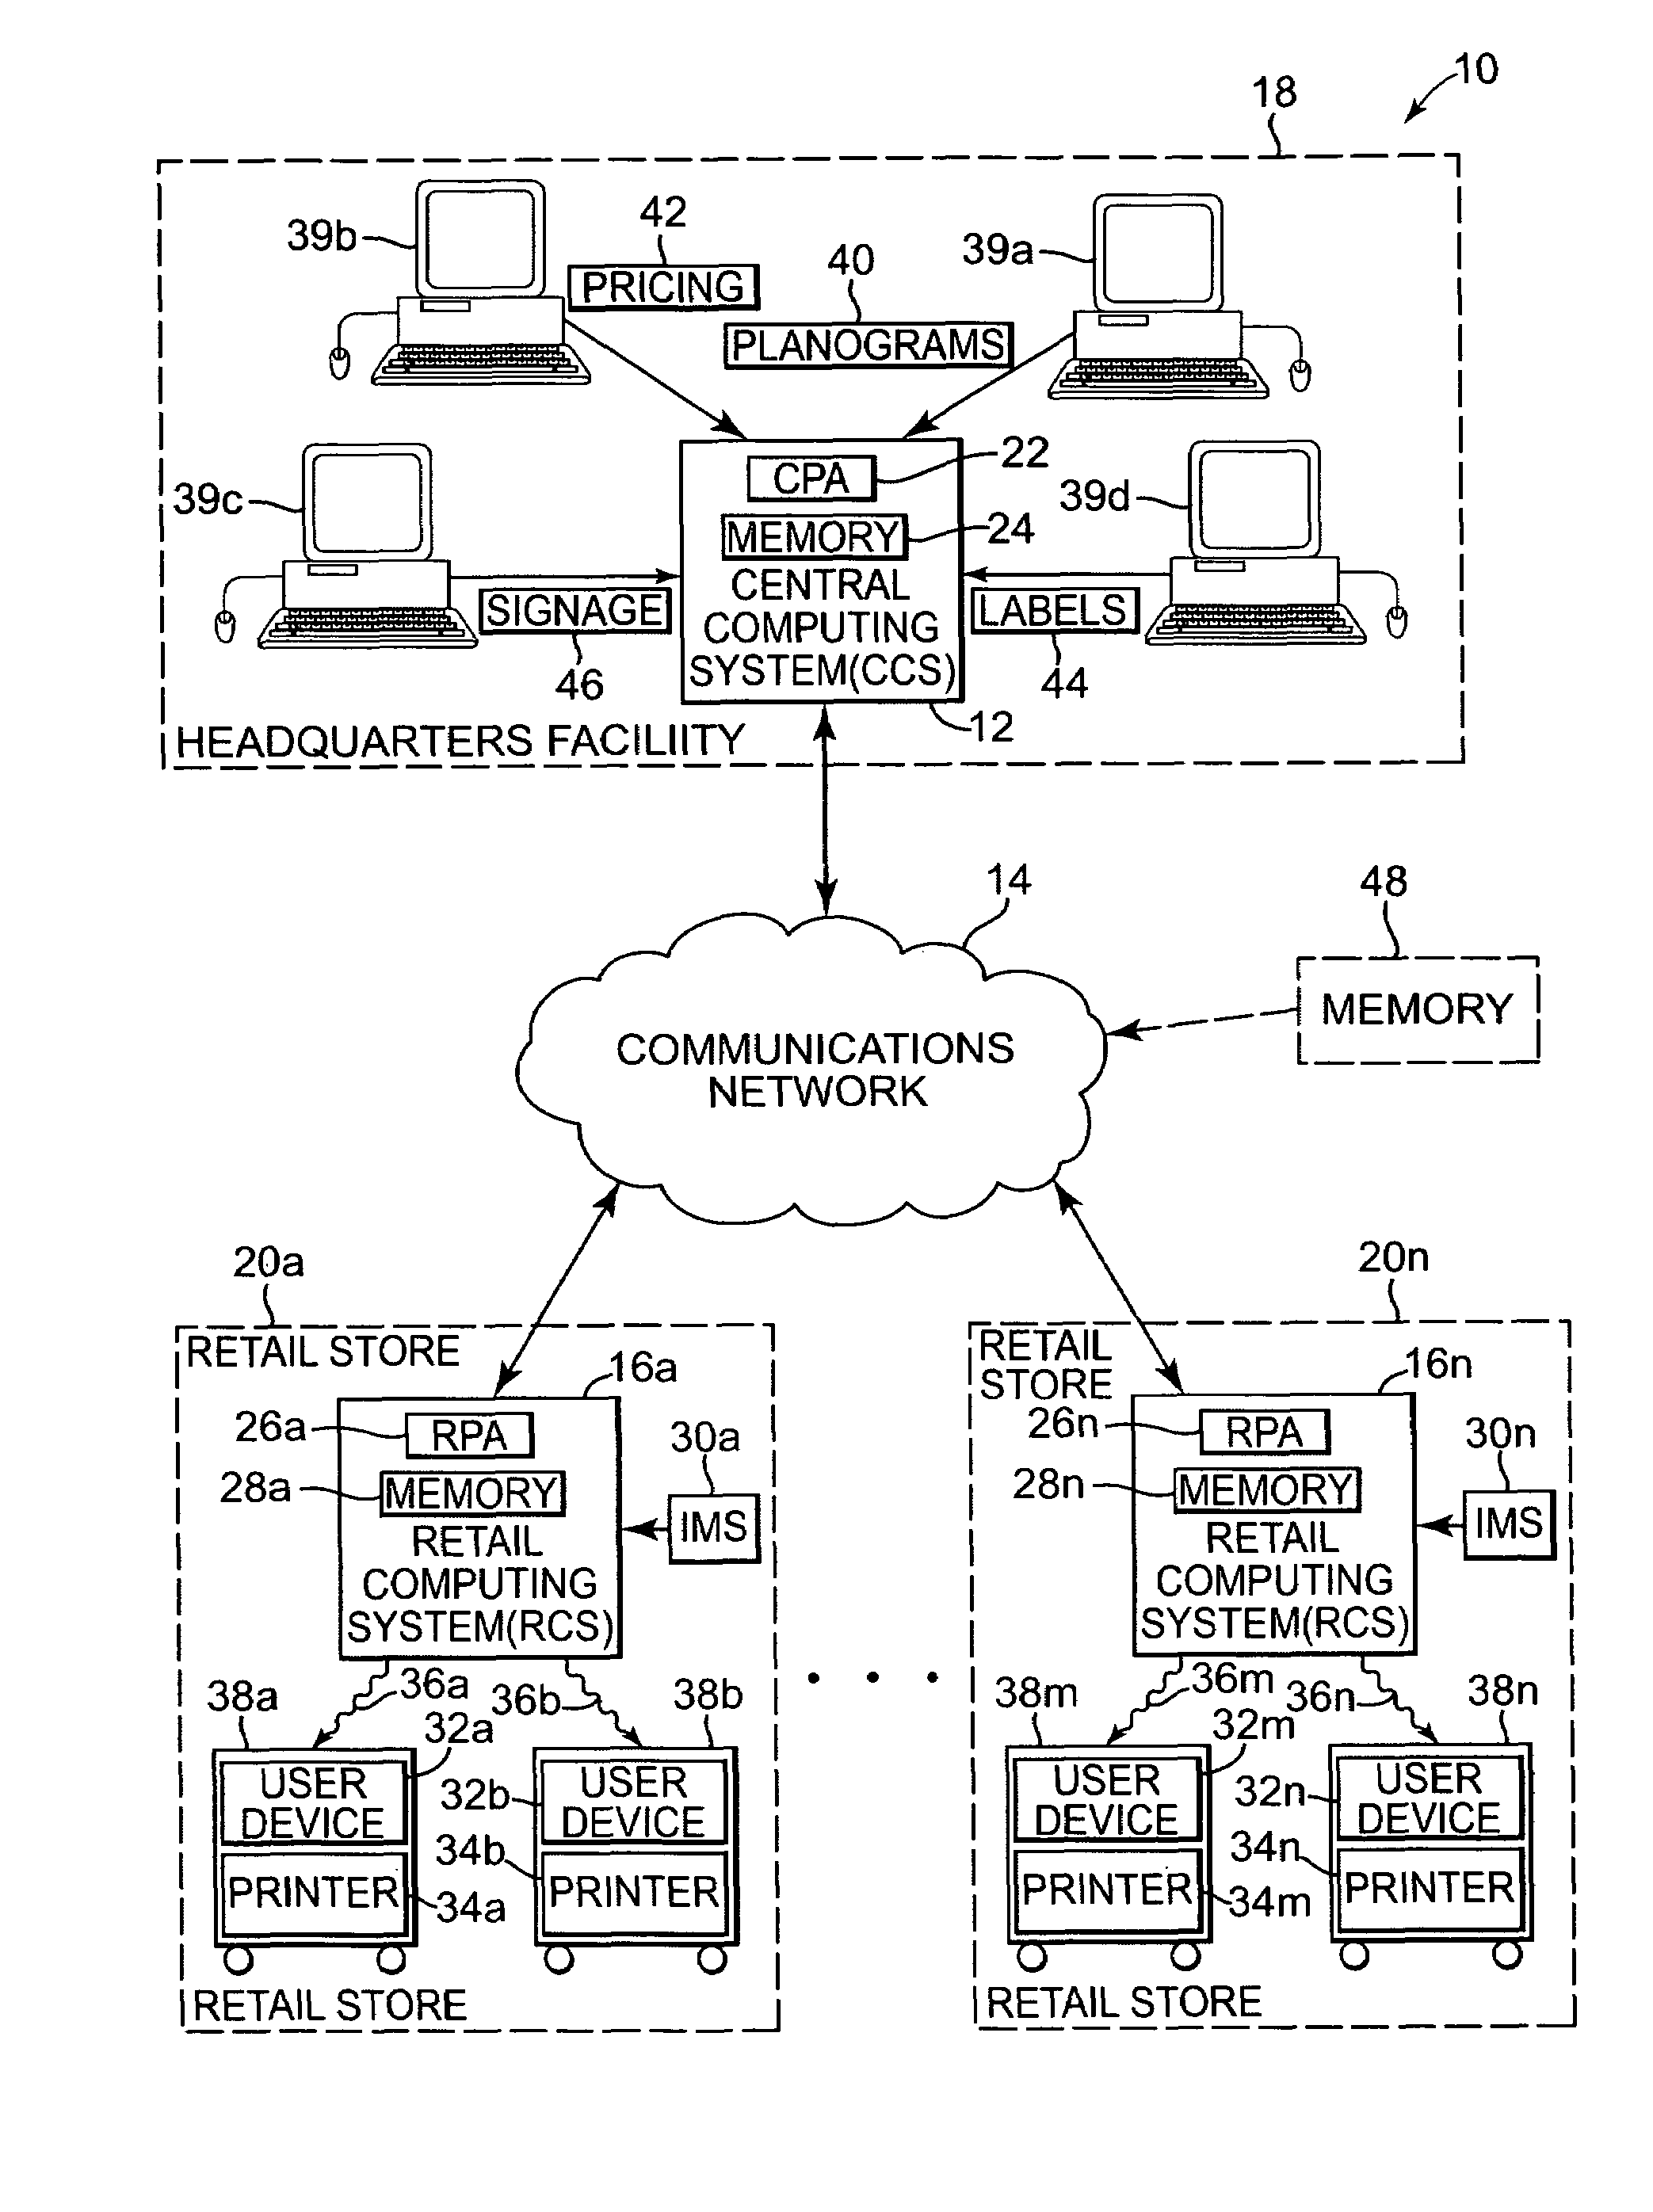 System and method for evaluating and recommending planograms